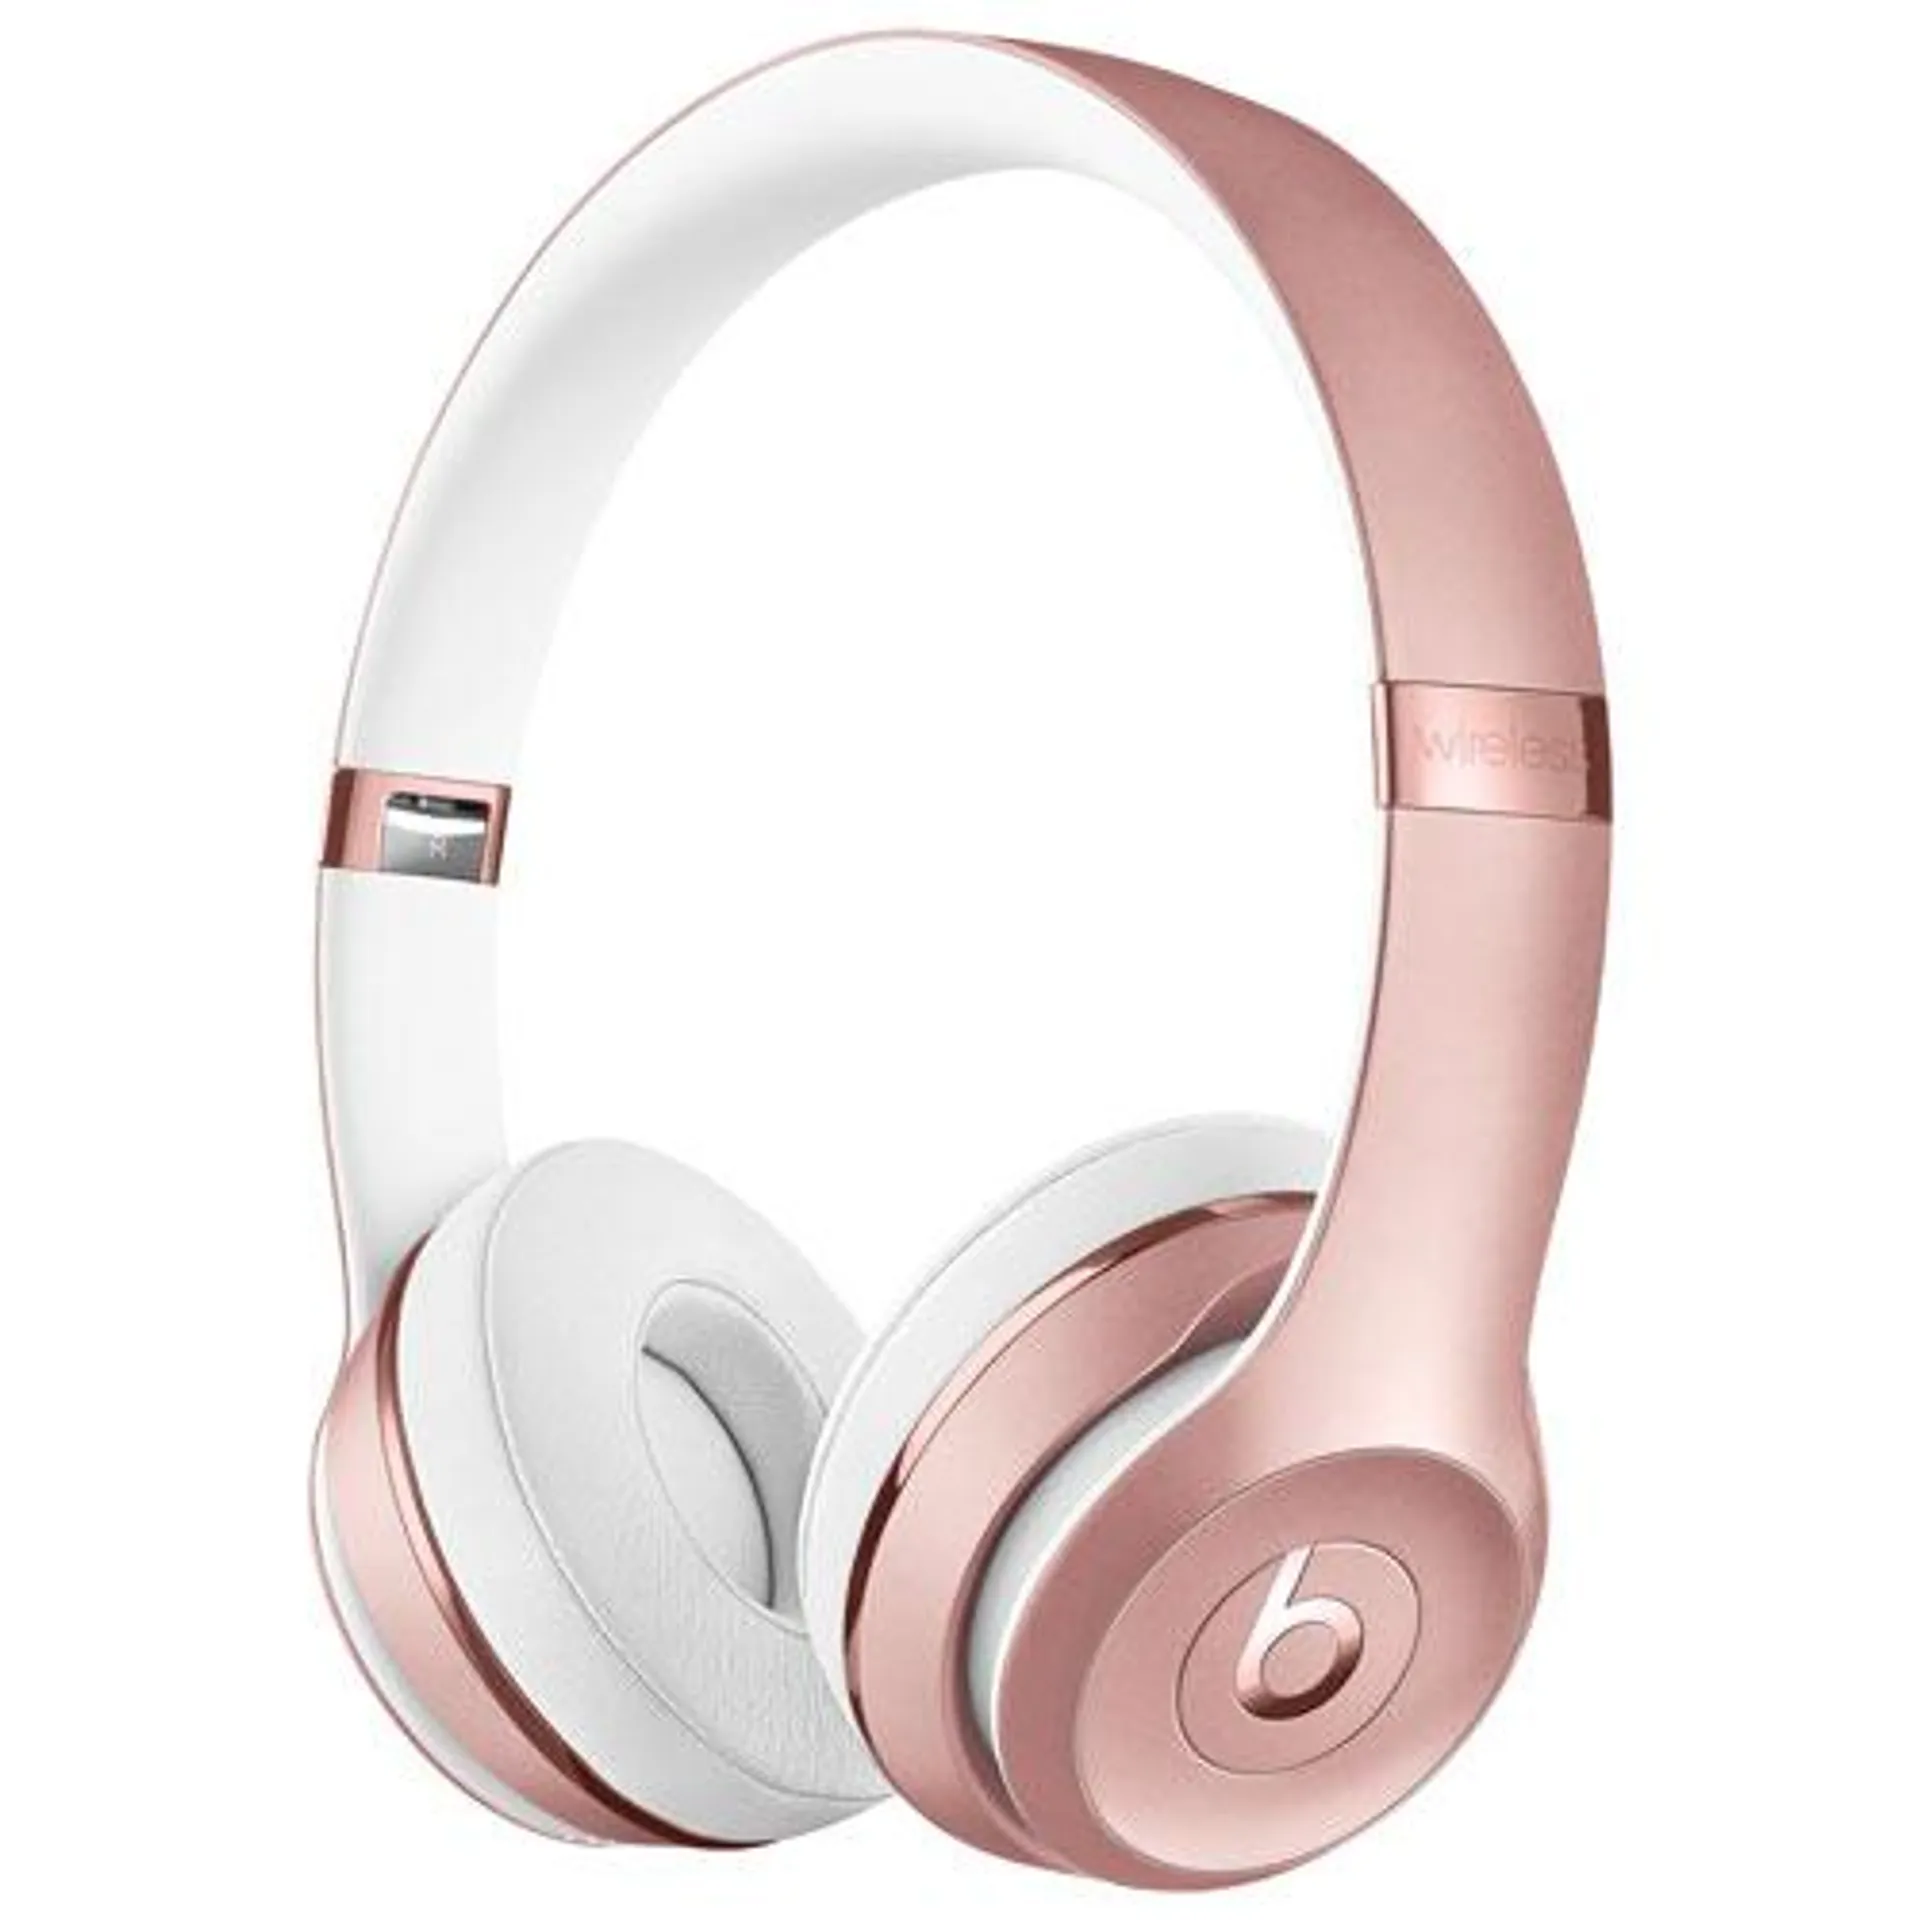 Beats by Dr. Dre Solo3 On-Ear Sound Isolating Bluetooth Headphones - Rose Gold